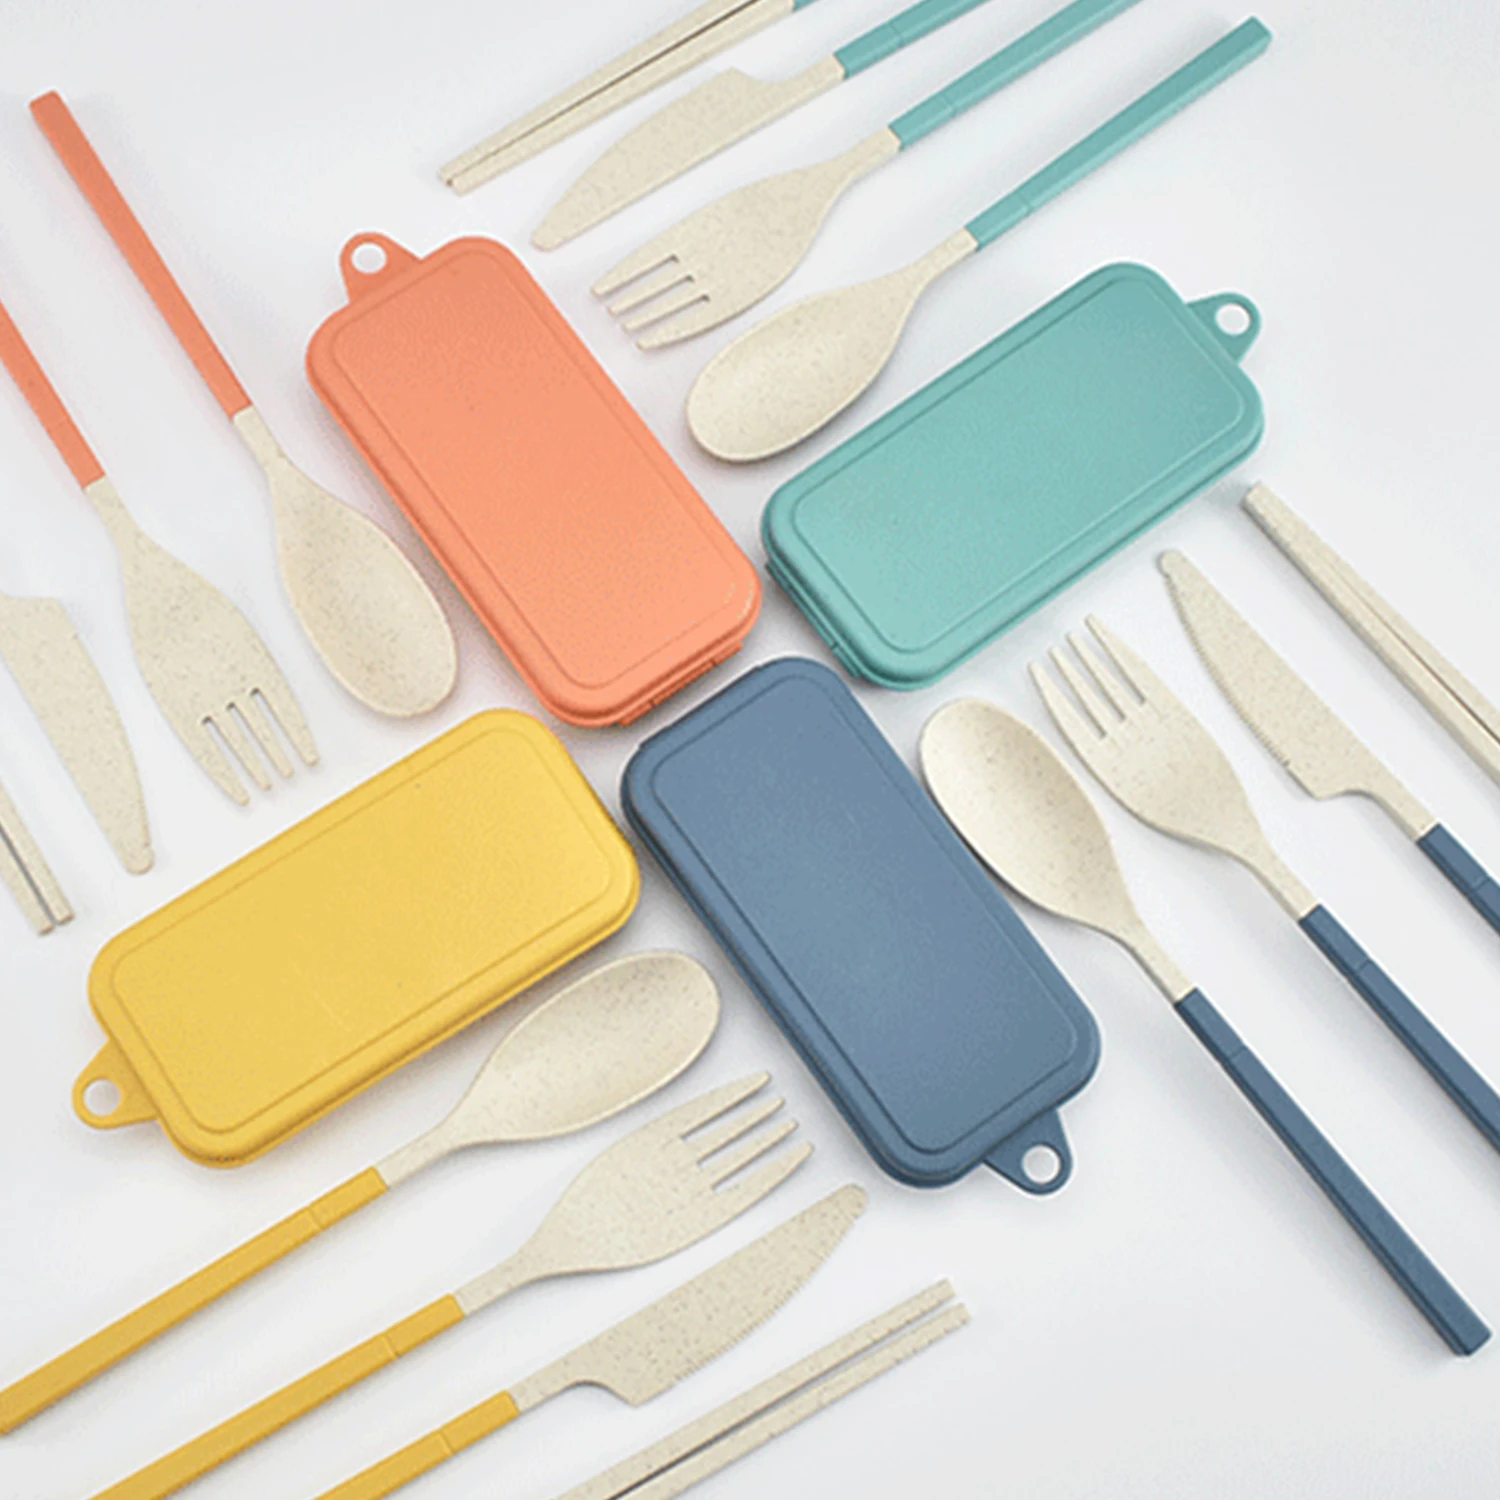 

Wheat Straw Cutlery Students Spoons Forks Chopsticks With Box Tableware Travel Portable Travel Detachable Kitchen Accessories